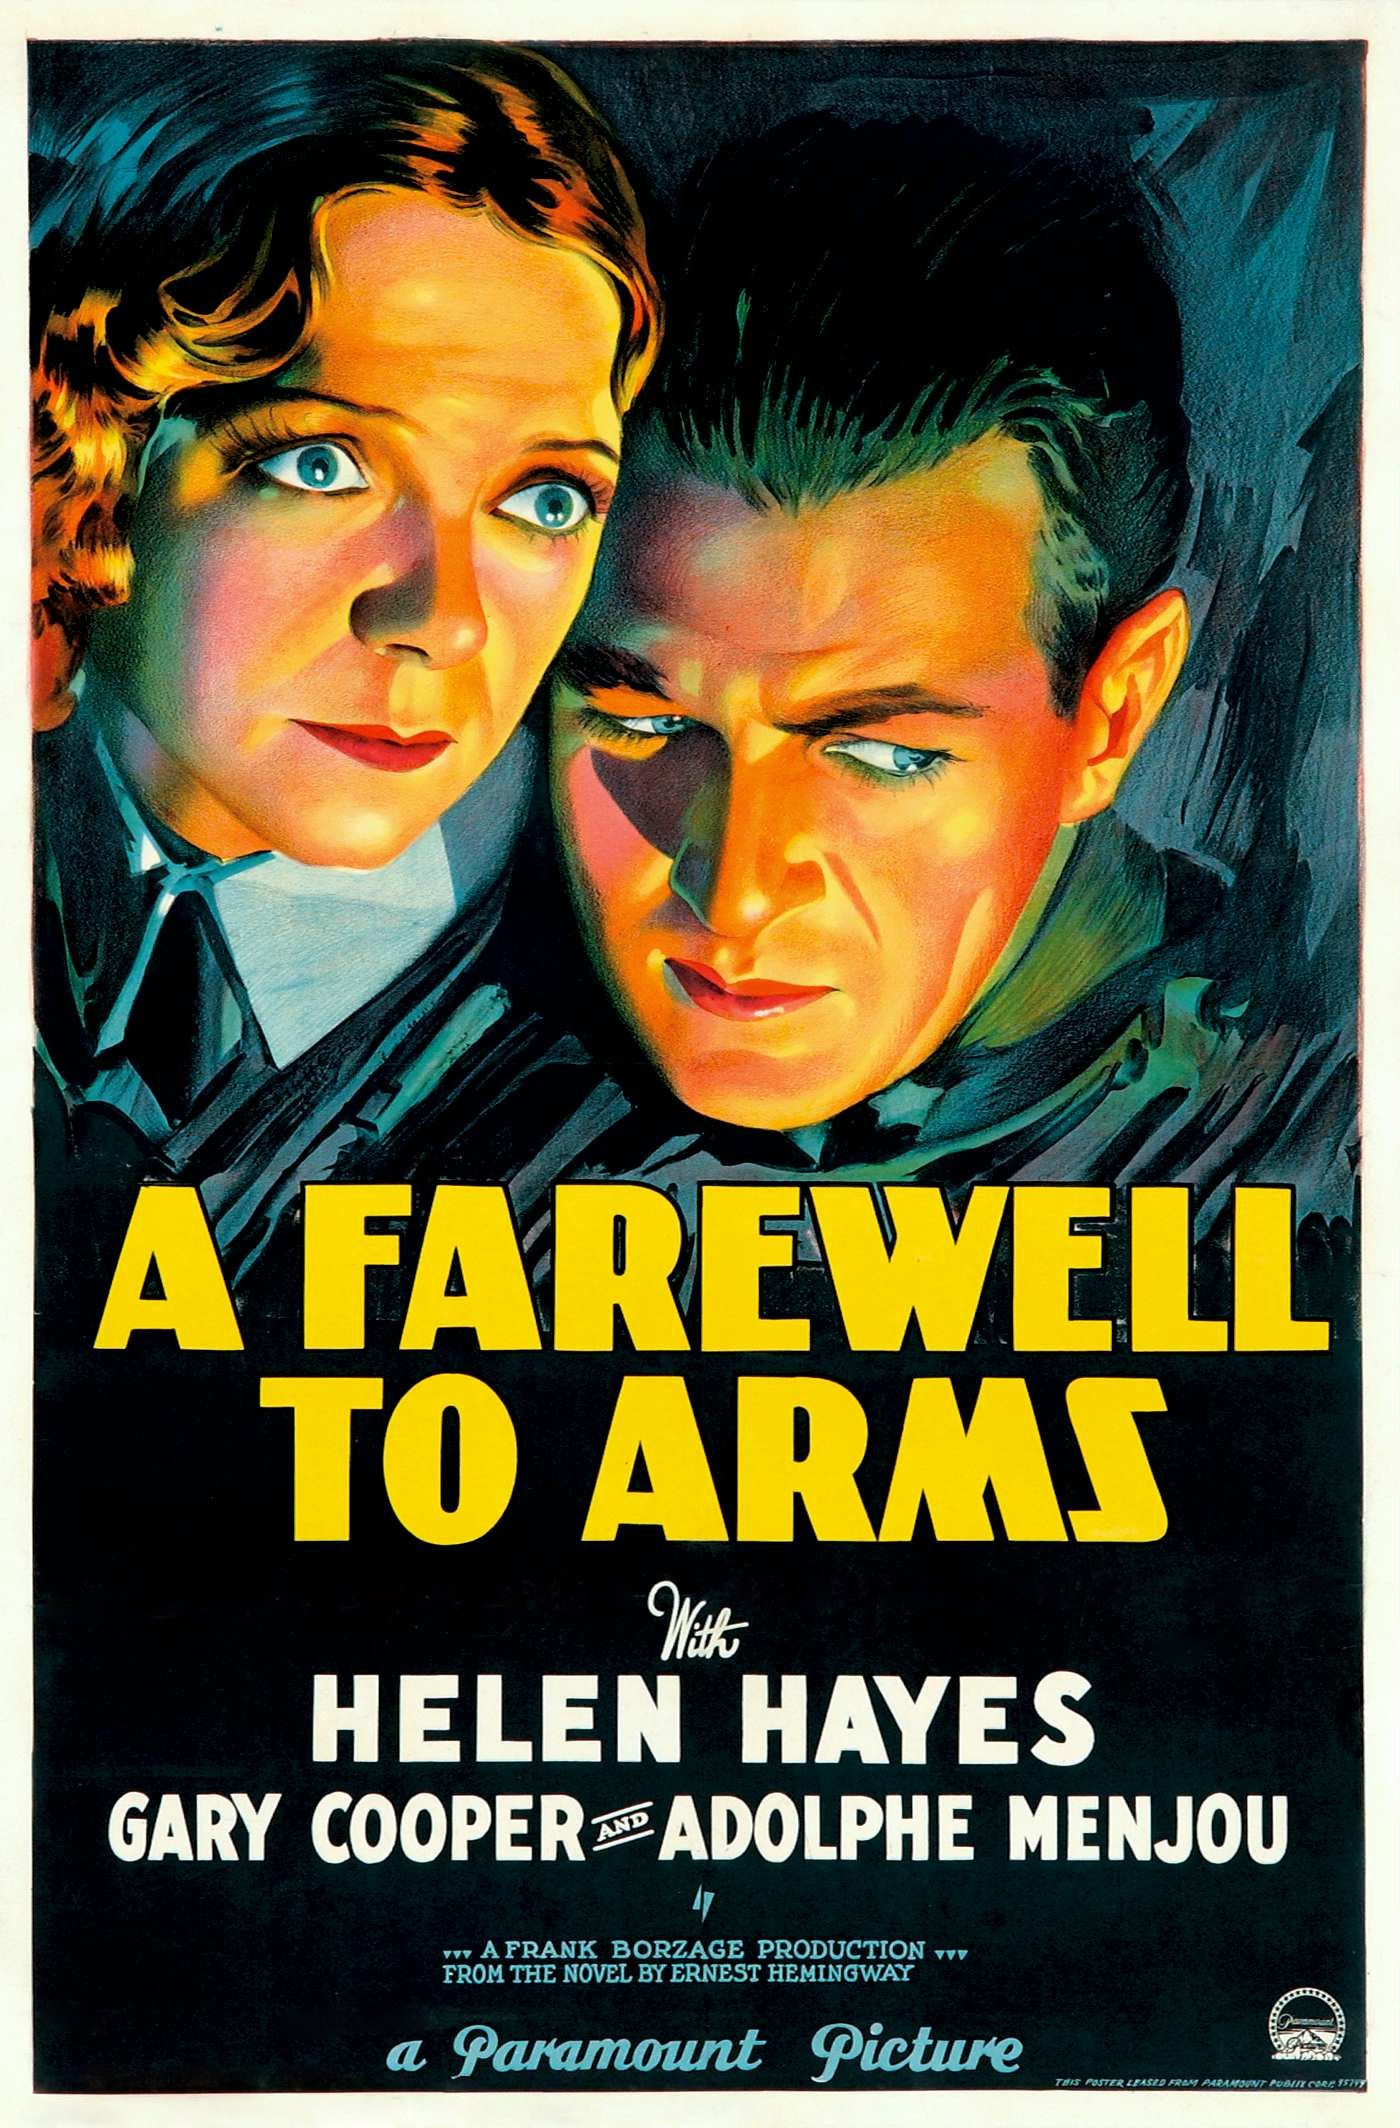 Essay questions for a farewell to arms